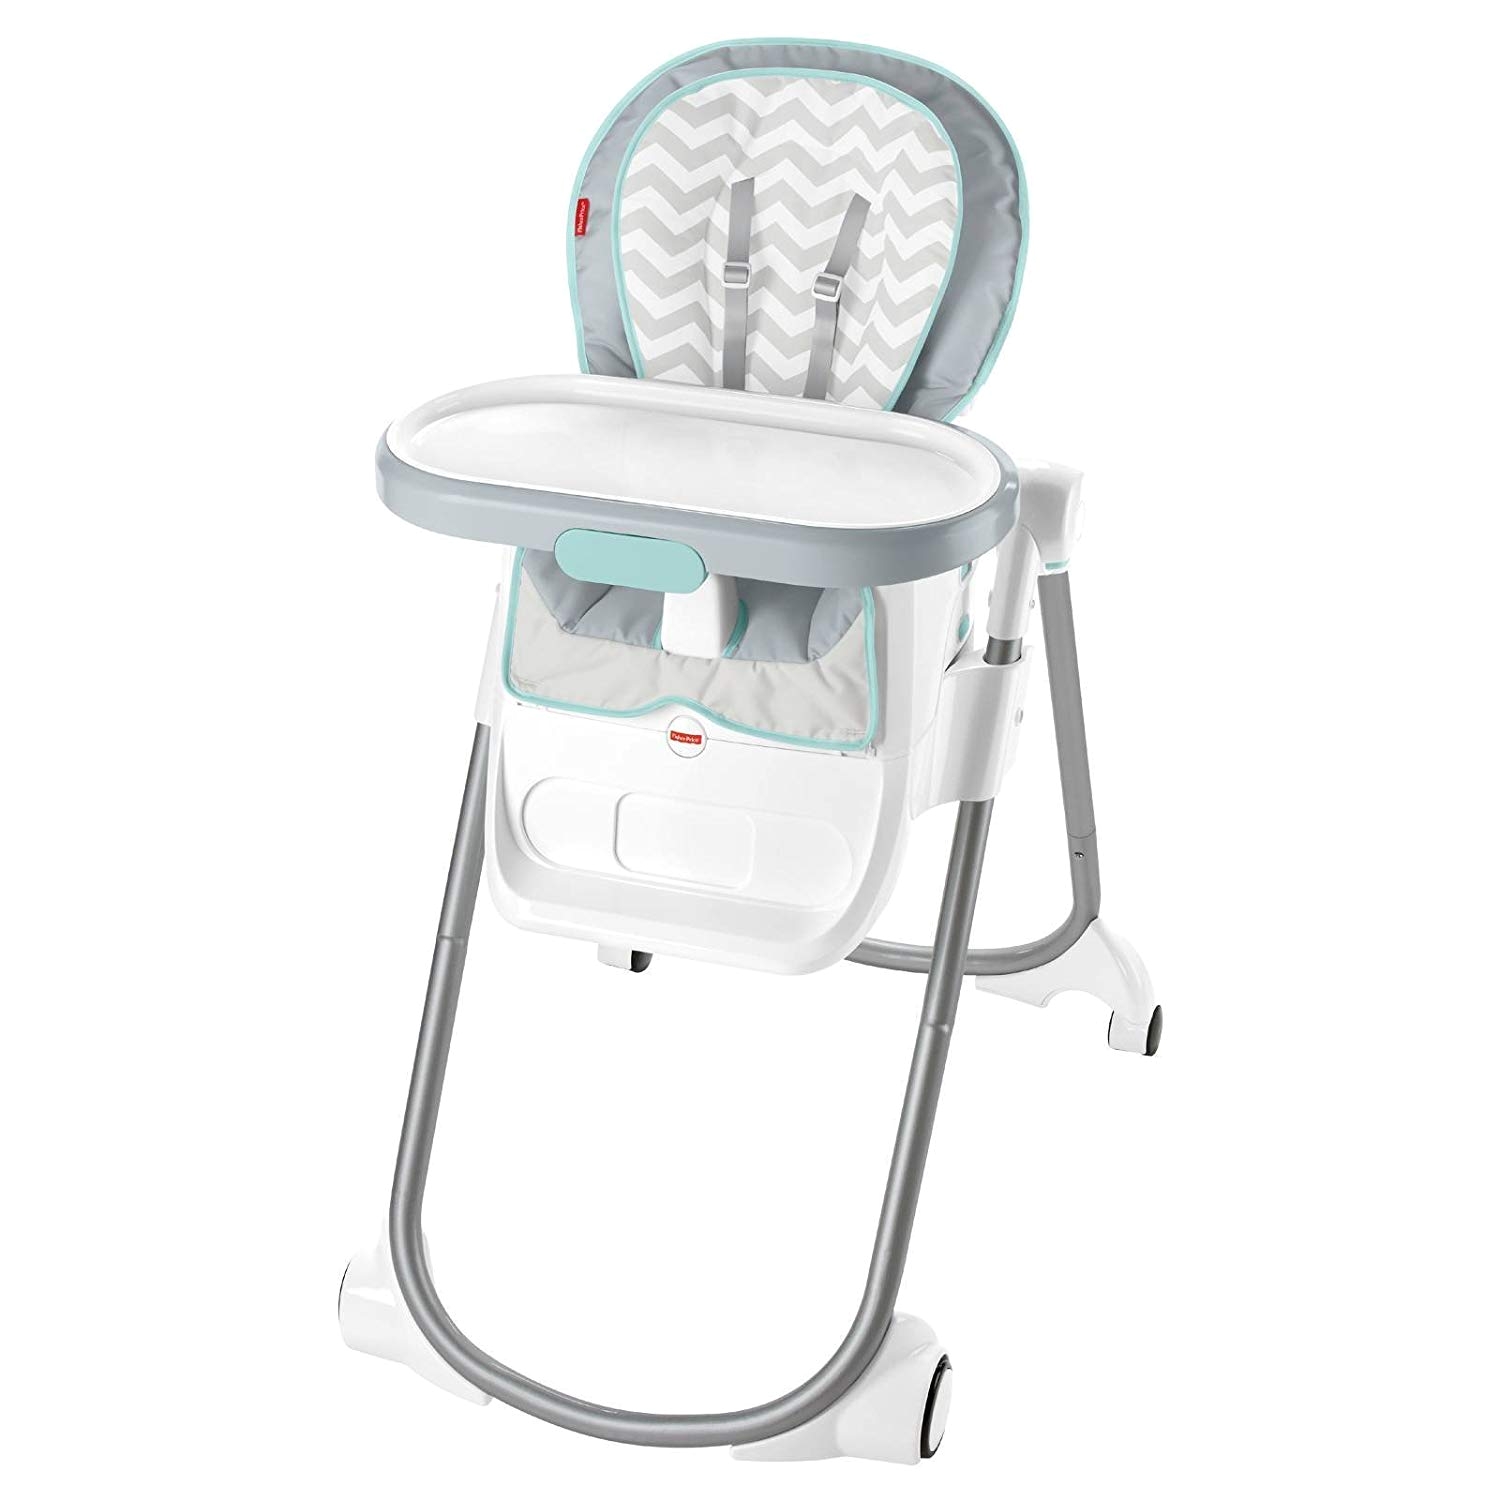 Fisher Price 4 In 1 Highchair Sweet Surroundings Amazon Com Fisher Price 4 In 1 total Clean High Chair Sweet